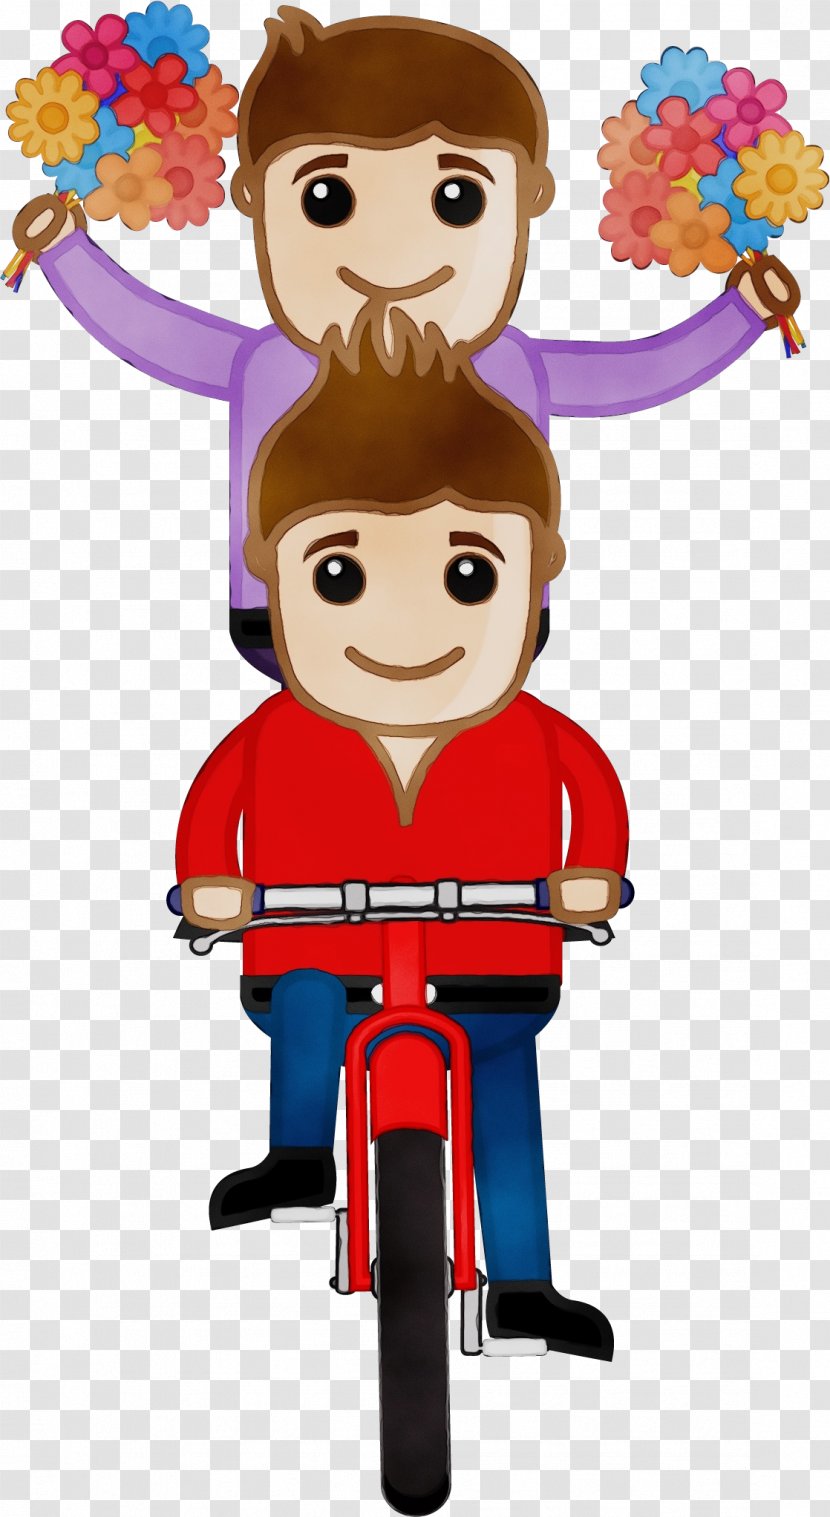 Cartoon Clip Art Animated Toy Animation - Paint Transparent PNG